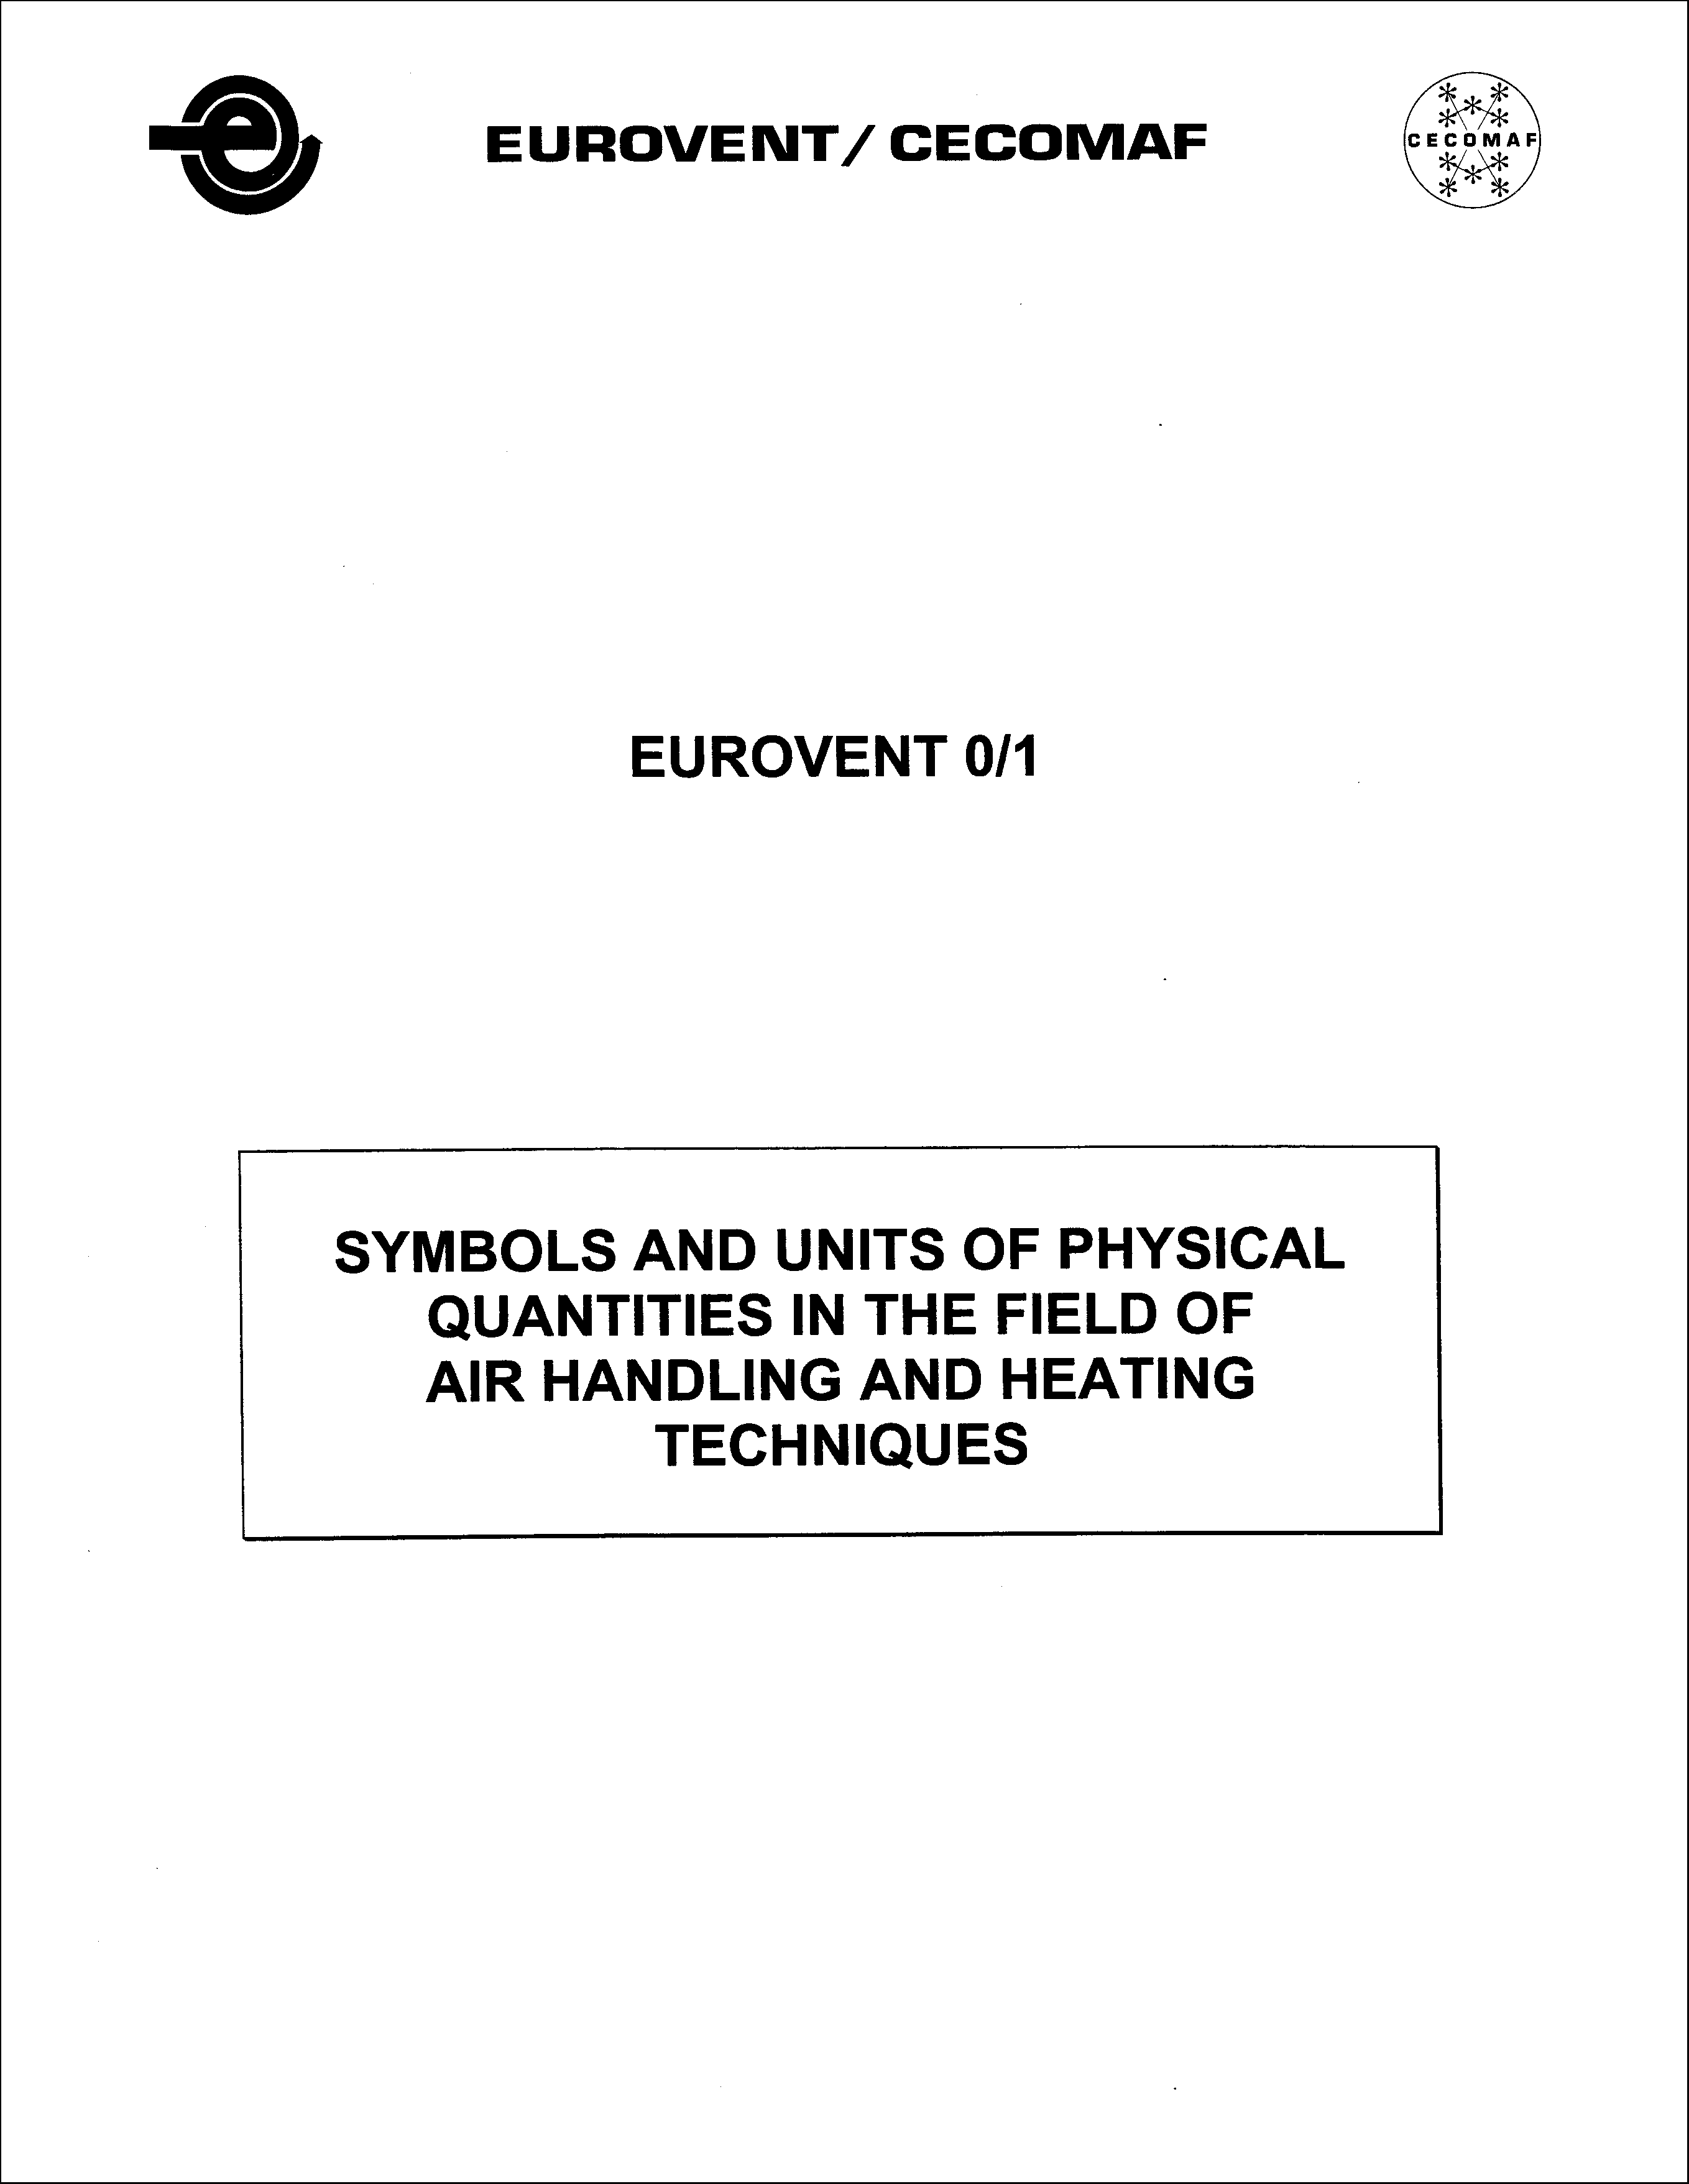 1983 - Symbols and units of physical quantities in the field of air handling and heating techniques